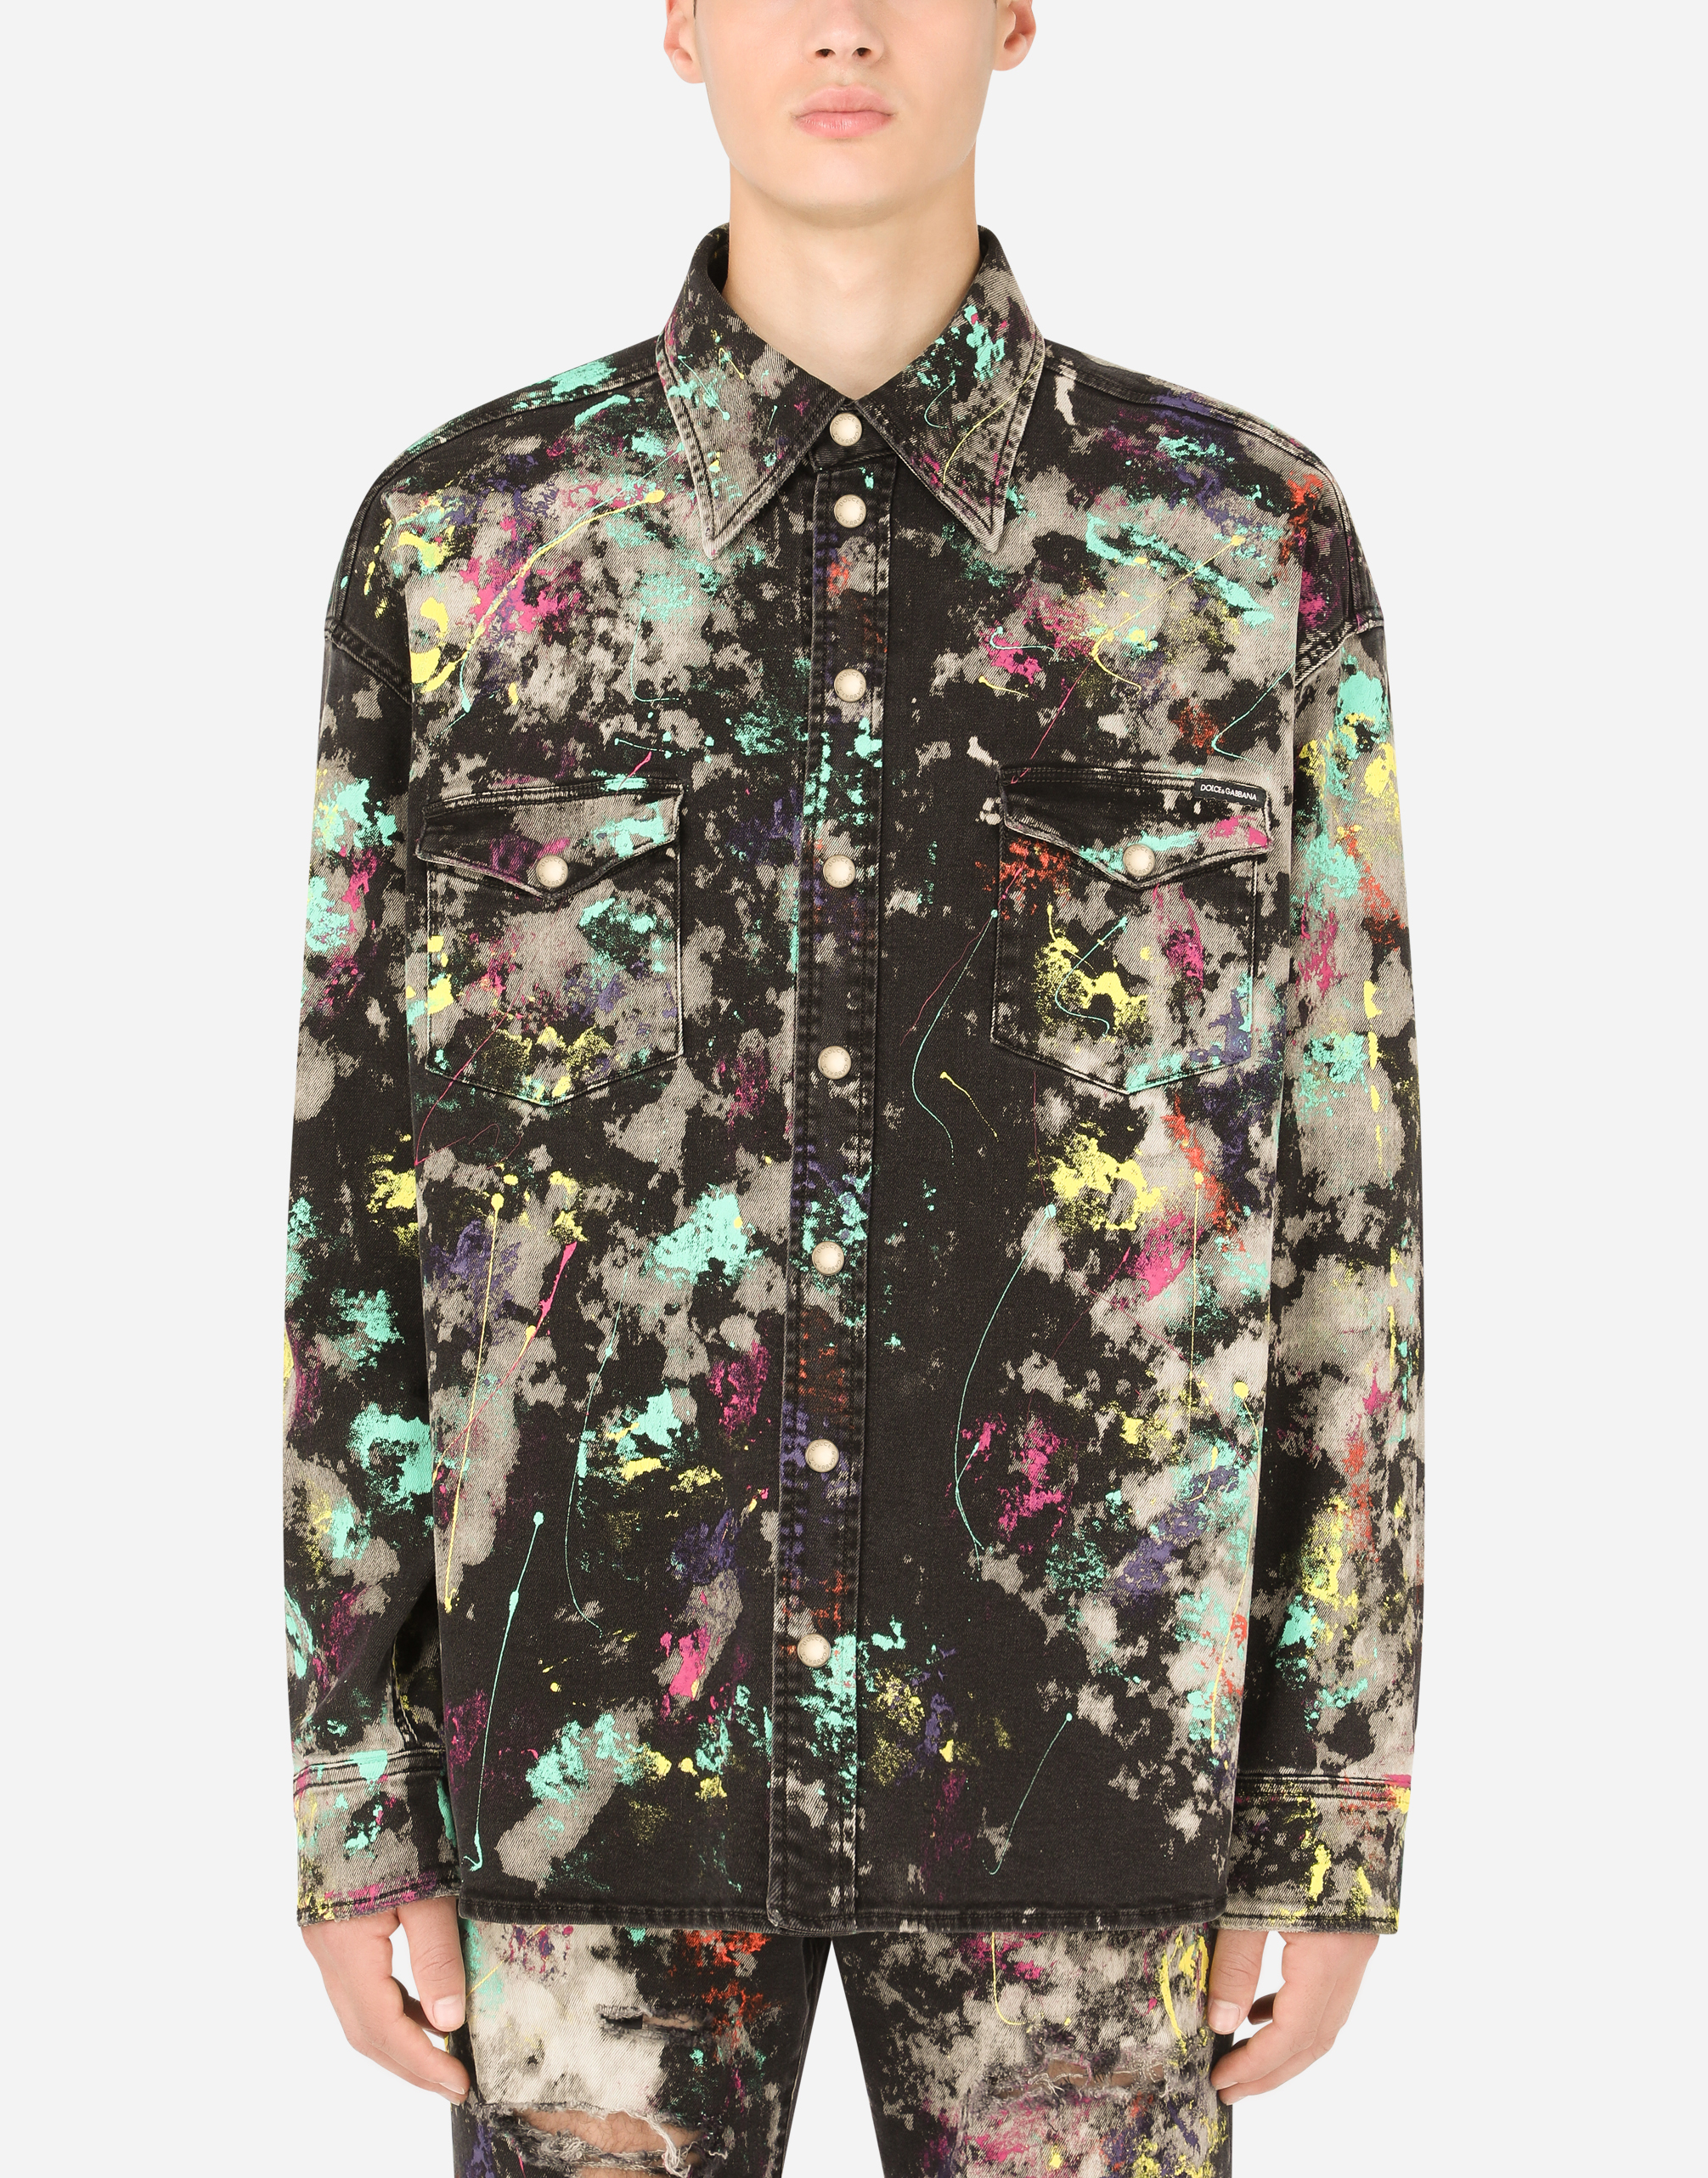 Black denim shirt with marbled print in Multicolor